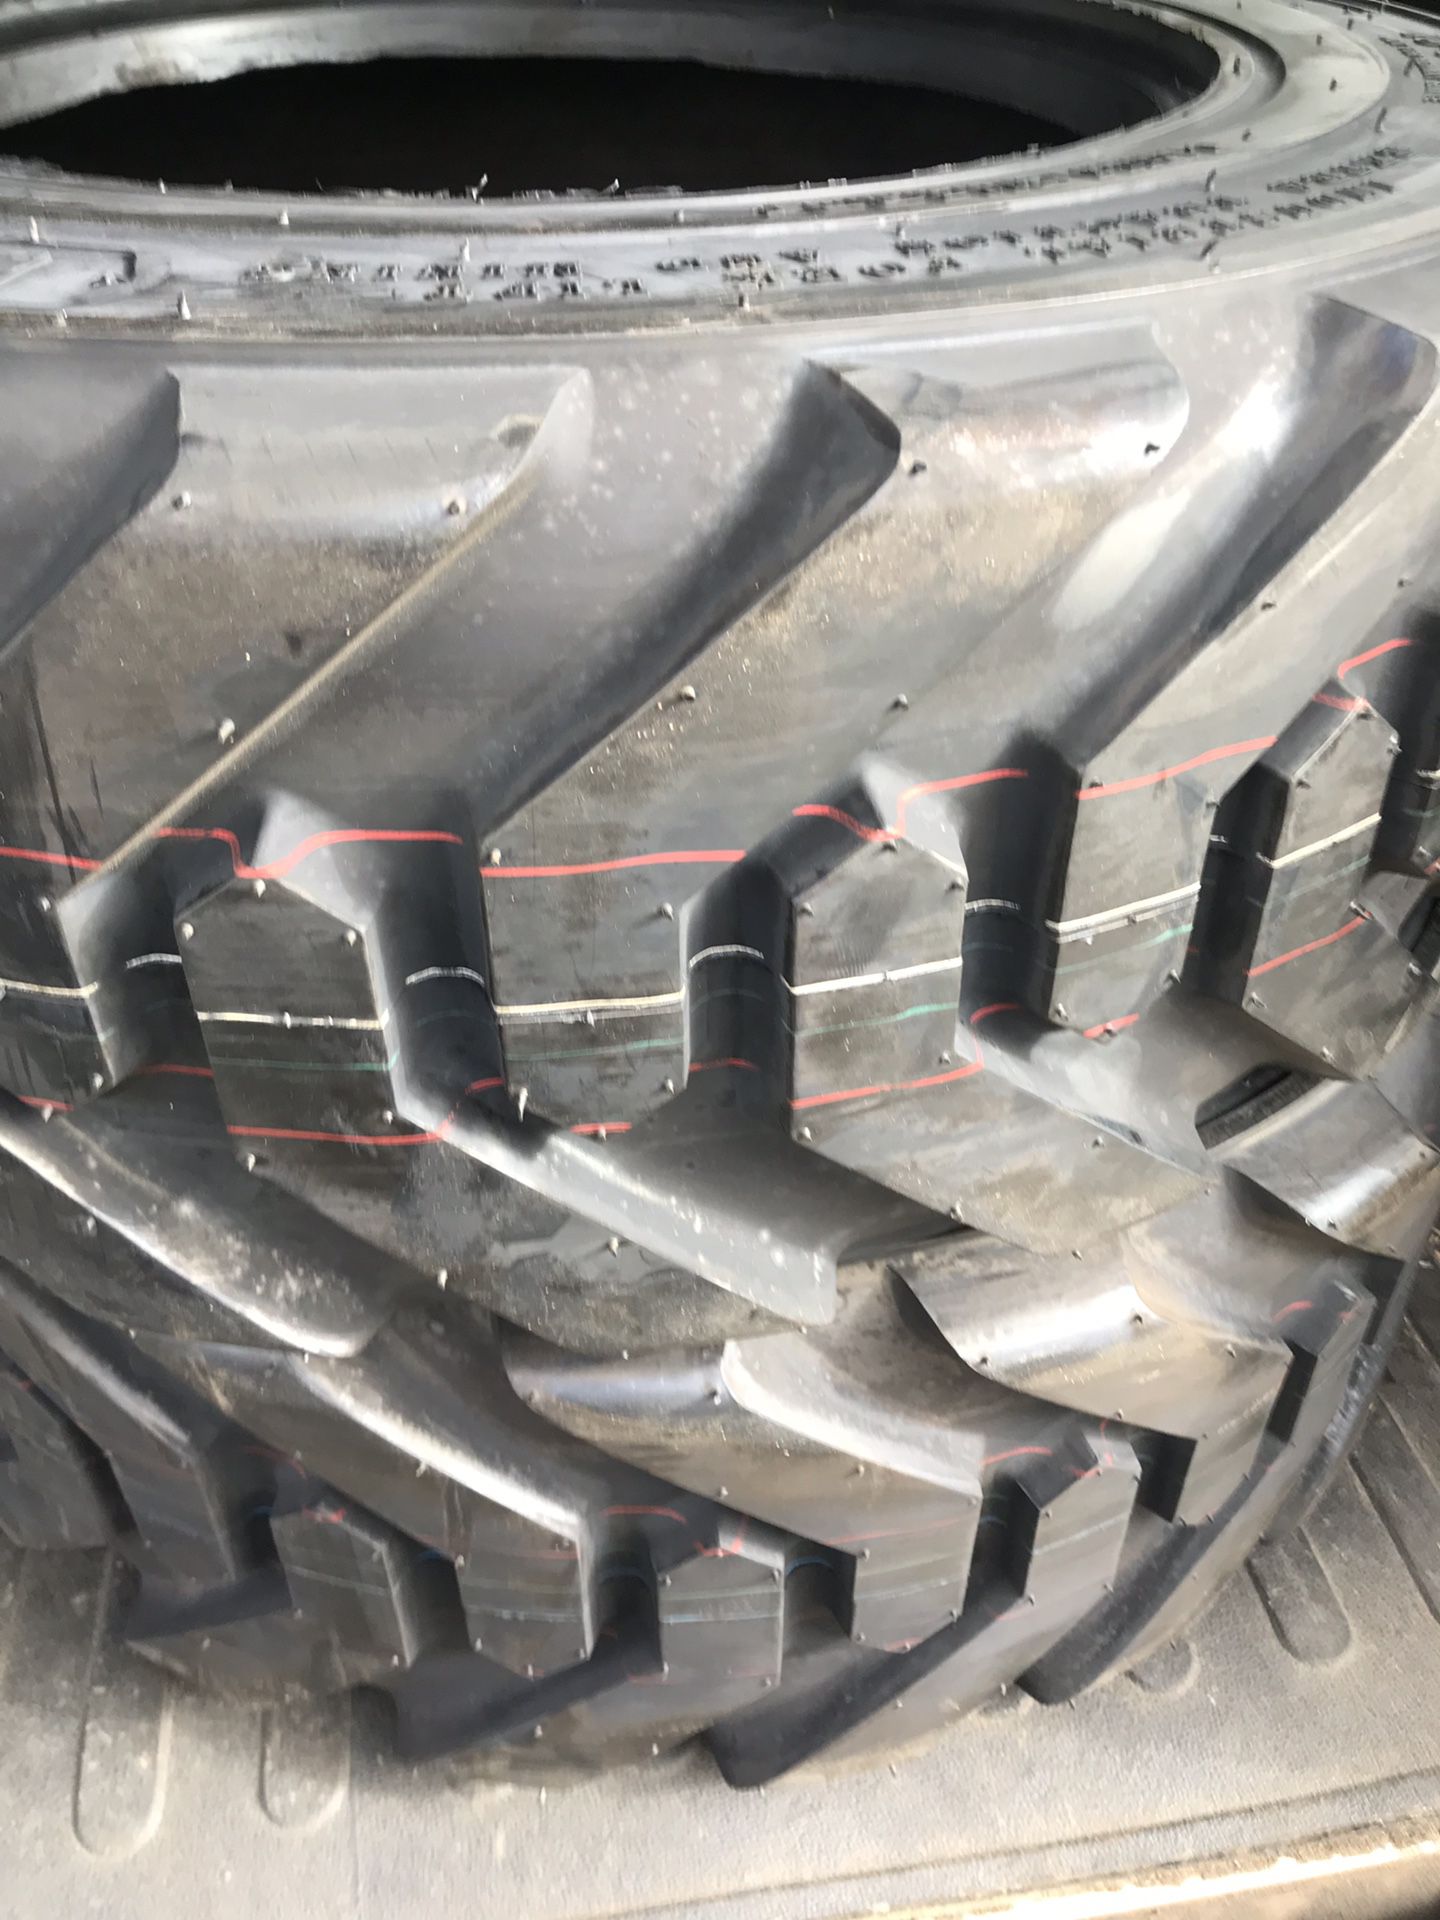 Bobcat tire and skid steer tire 12x16.5 carry out only $135 each